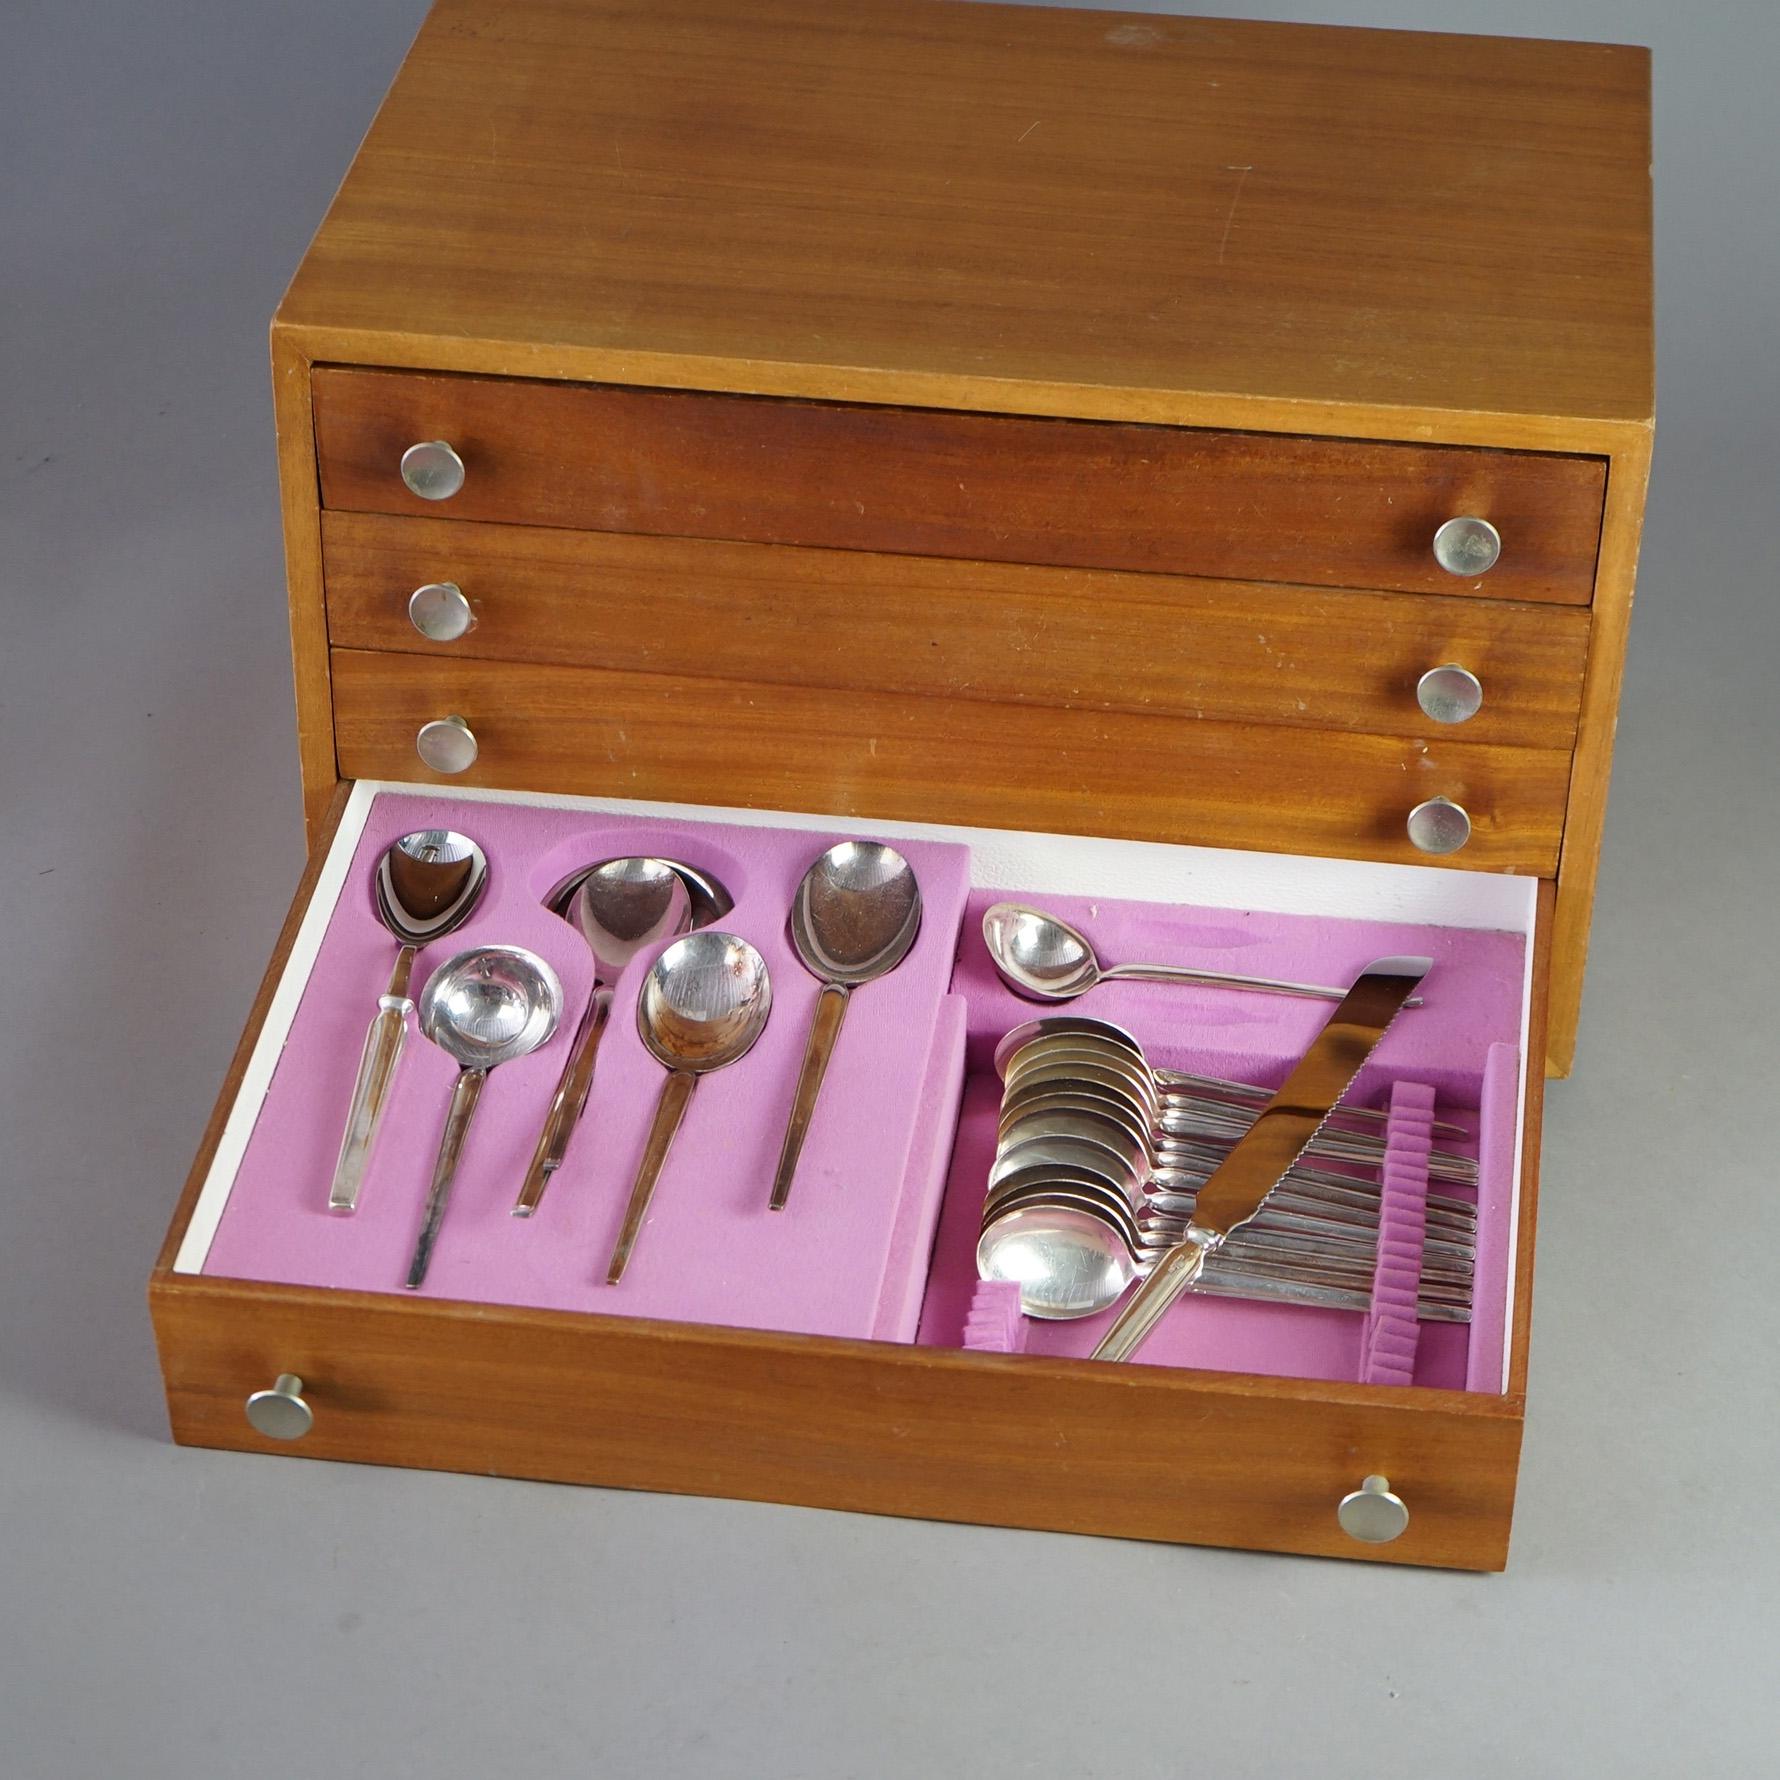 A Mid Century Modern set of 179 pieces of stainless steel flatware by Sola Elite offers flatware and serving pieces in teak wood silverware chest having four drawers, maker mark as photographed, some mismatched pieces as photographed, 20th